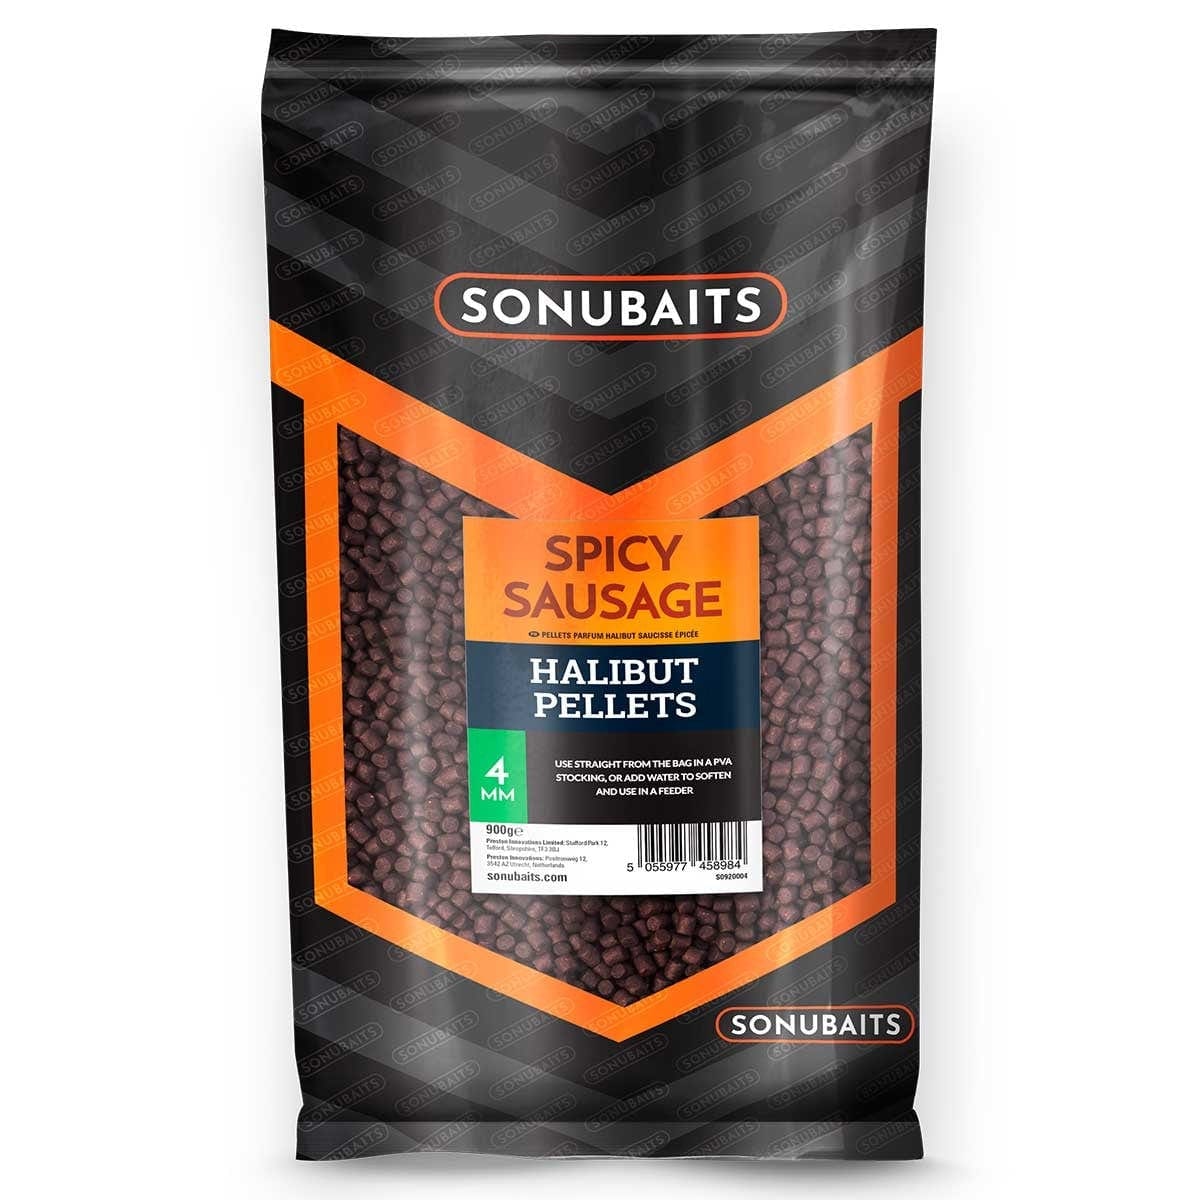 Sonubaits Spicy Sausage Halibut Pellets - 4mm, 6mm or 8mm Choices.